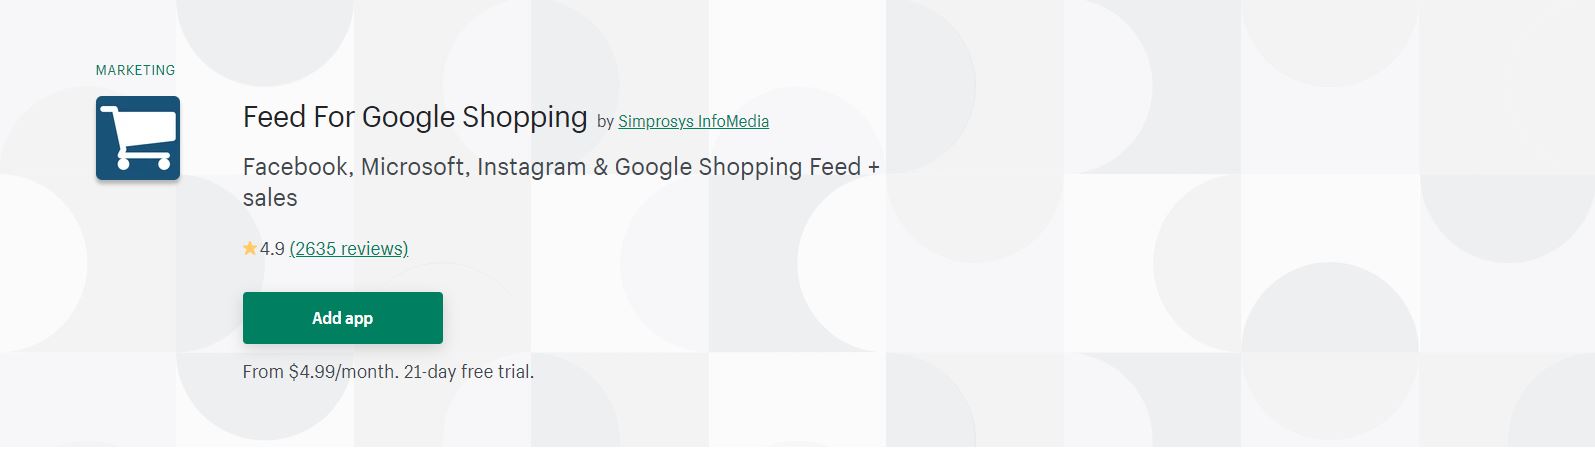 Feed For Google Shopping